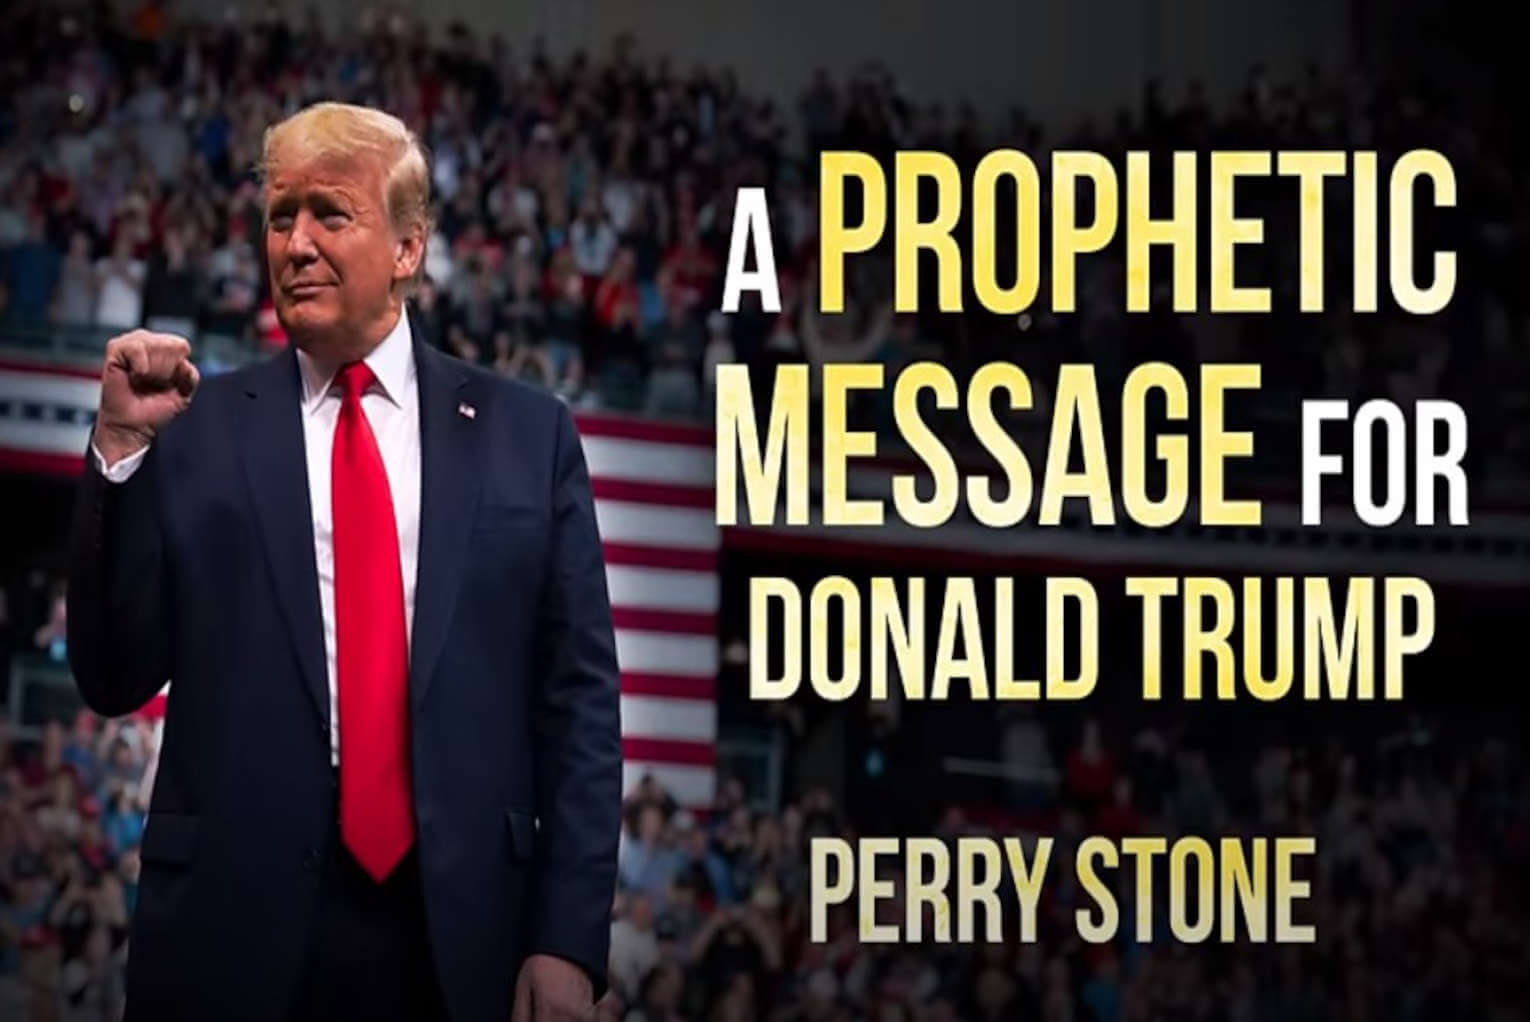 Perry Stone: Could God Be Changing Donald Trump?